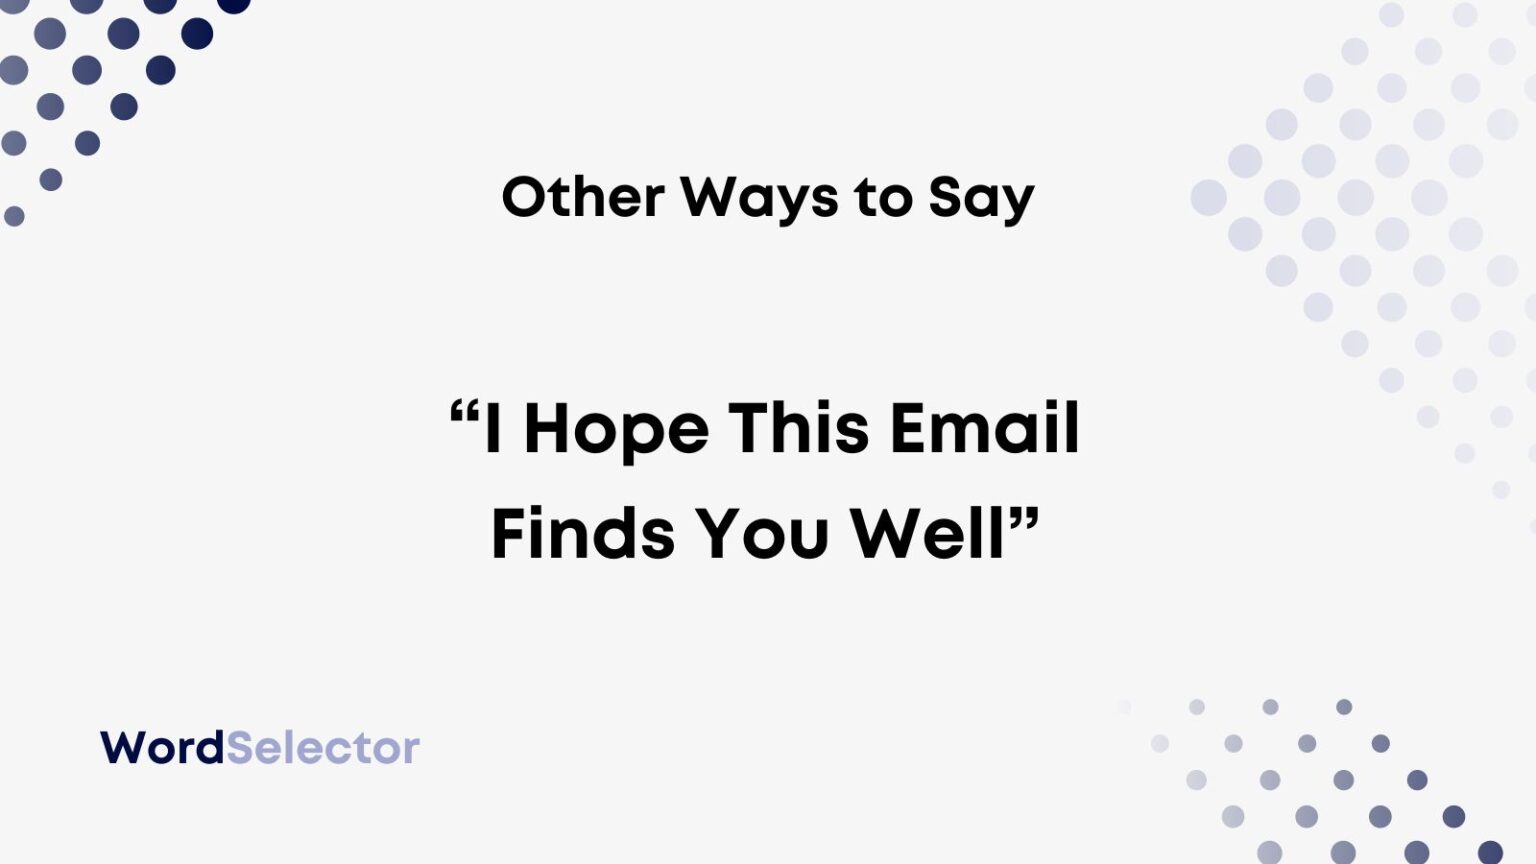 10 Other Ways to Say “I Hope This Email Finds You Well” - WordSelector